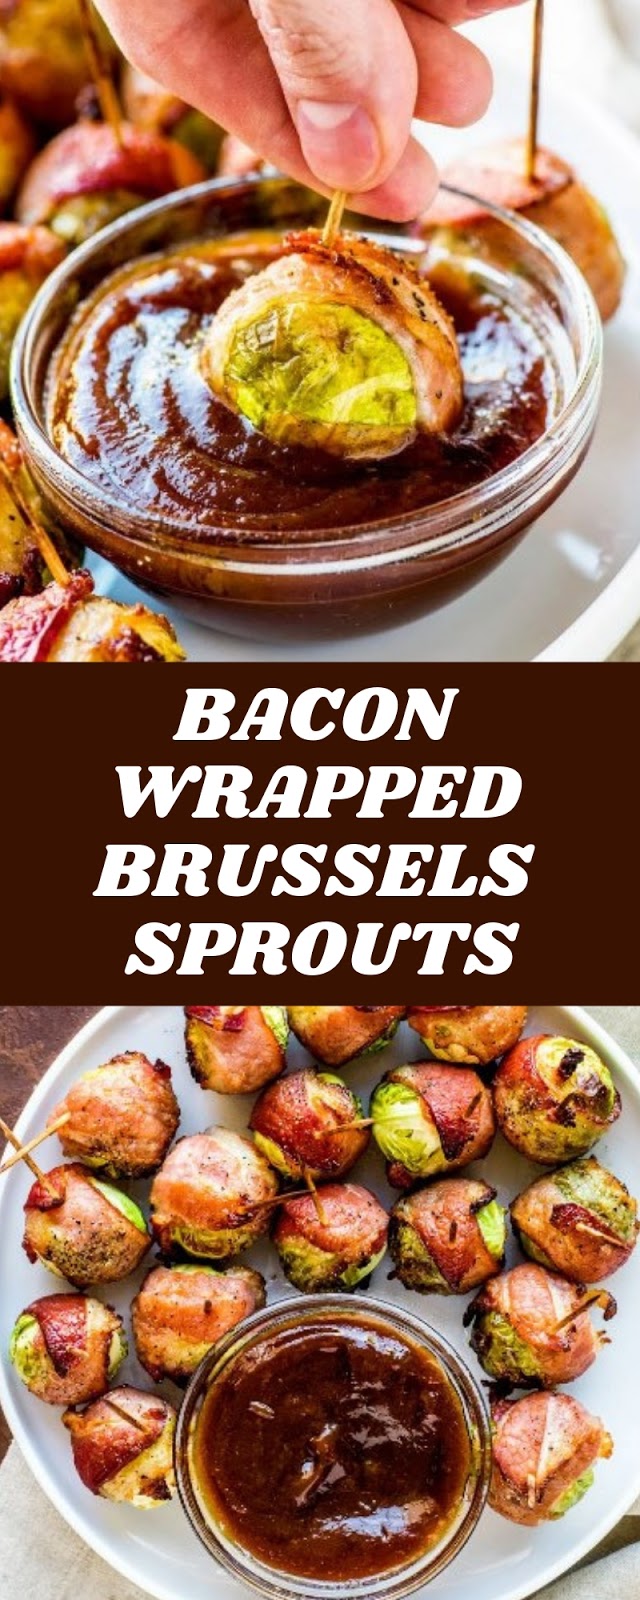 BACON WRAPPED BRUSSELS SPROUTS